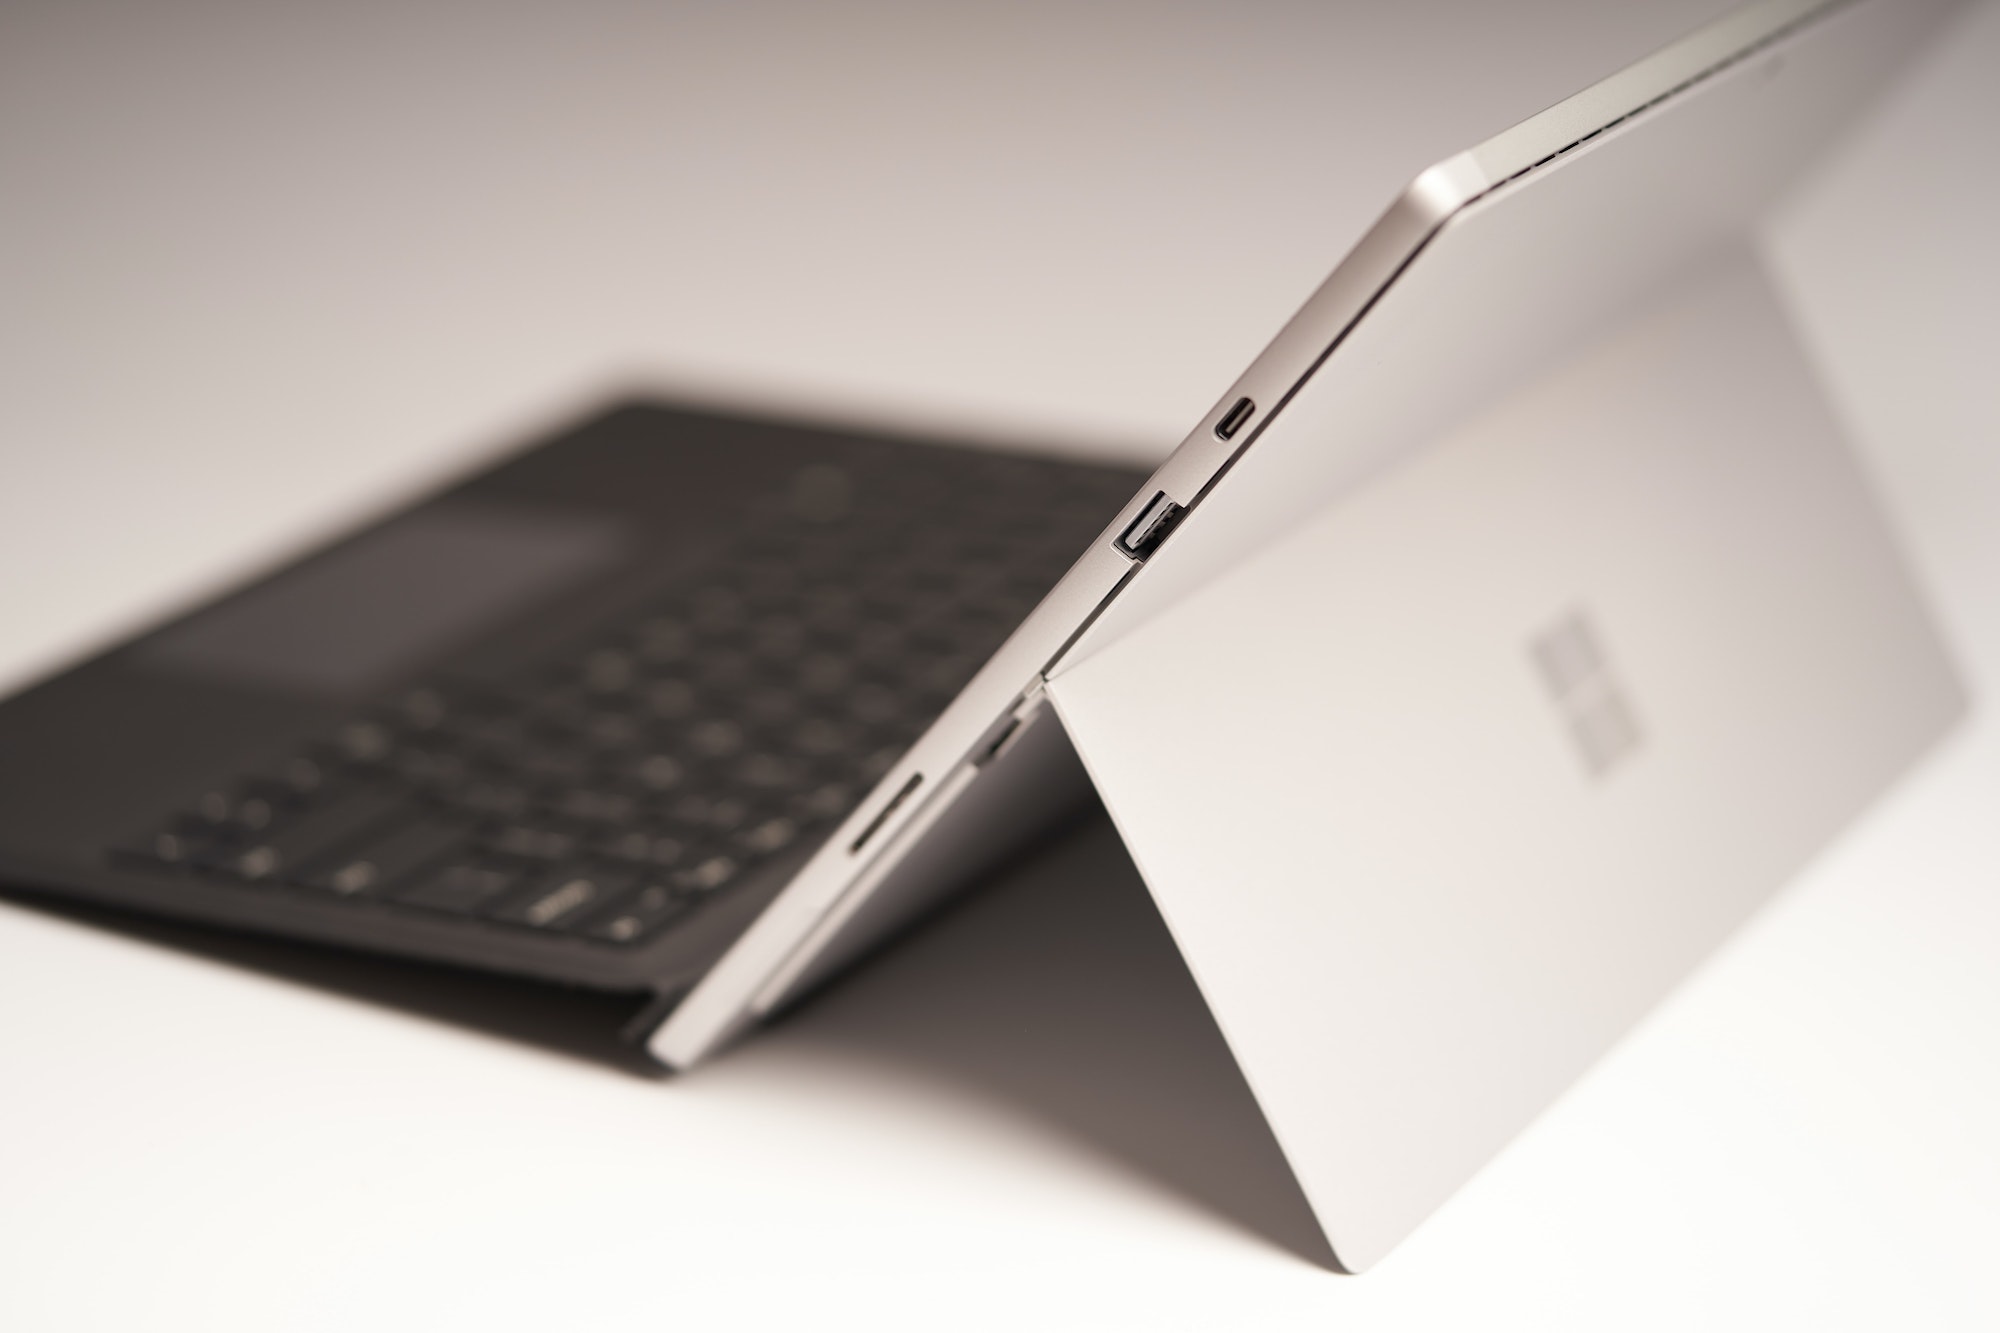 Microsoft is making it easier for customers to repair devices. Will other companies follow?